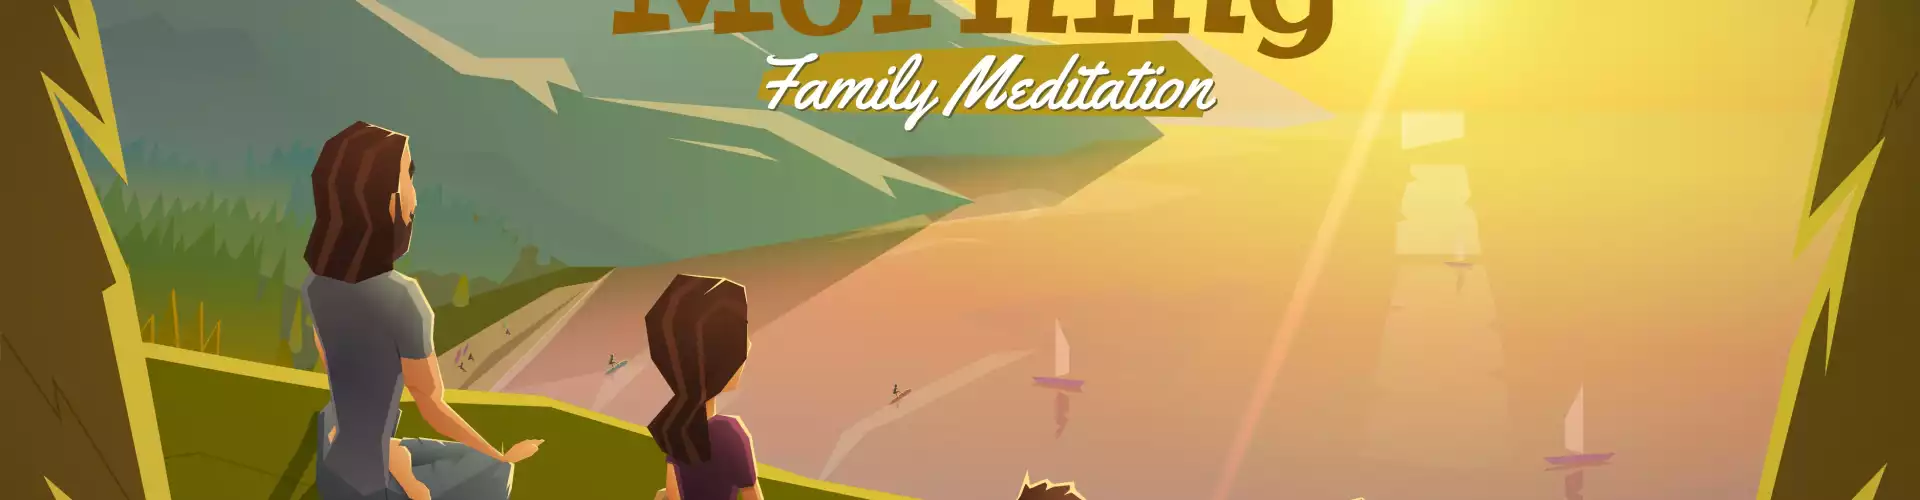 Meditation Made Simple! Free Guided Meditation Every1st & 3rd Thurs 